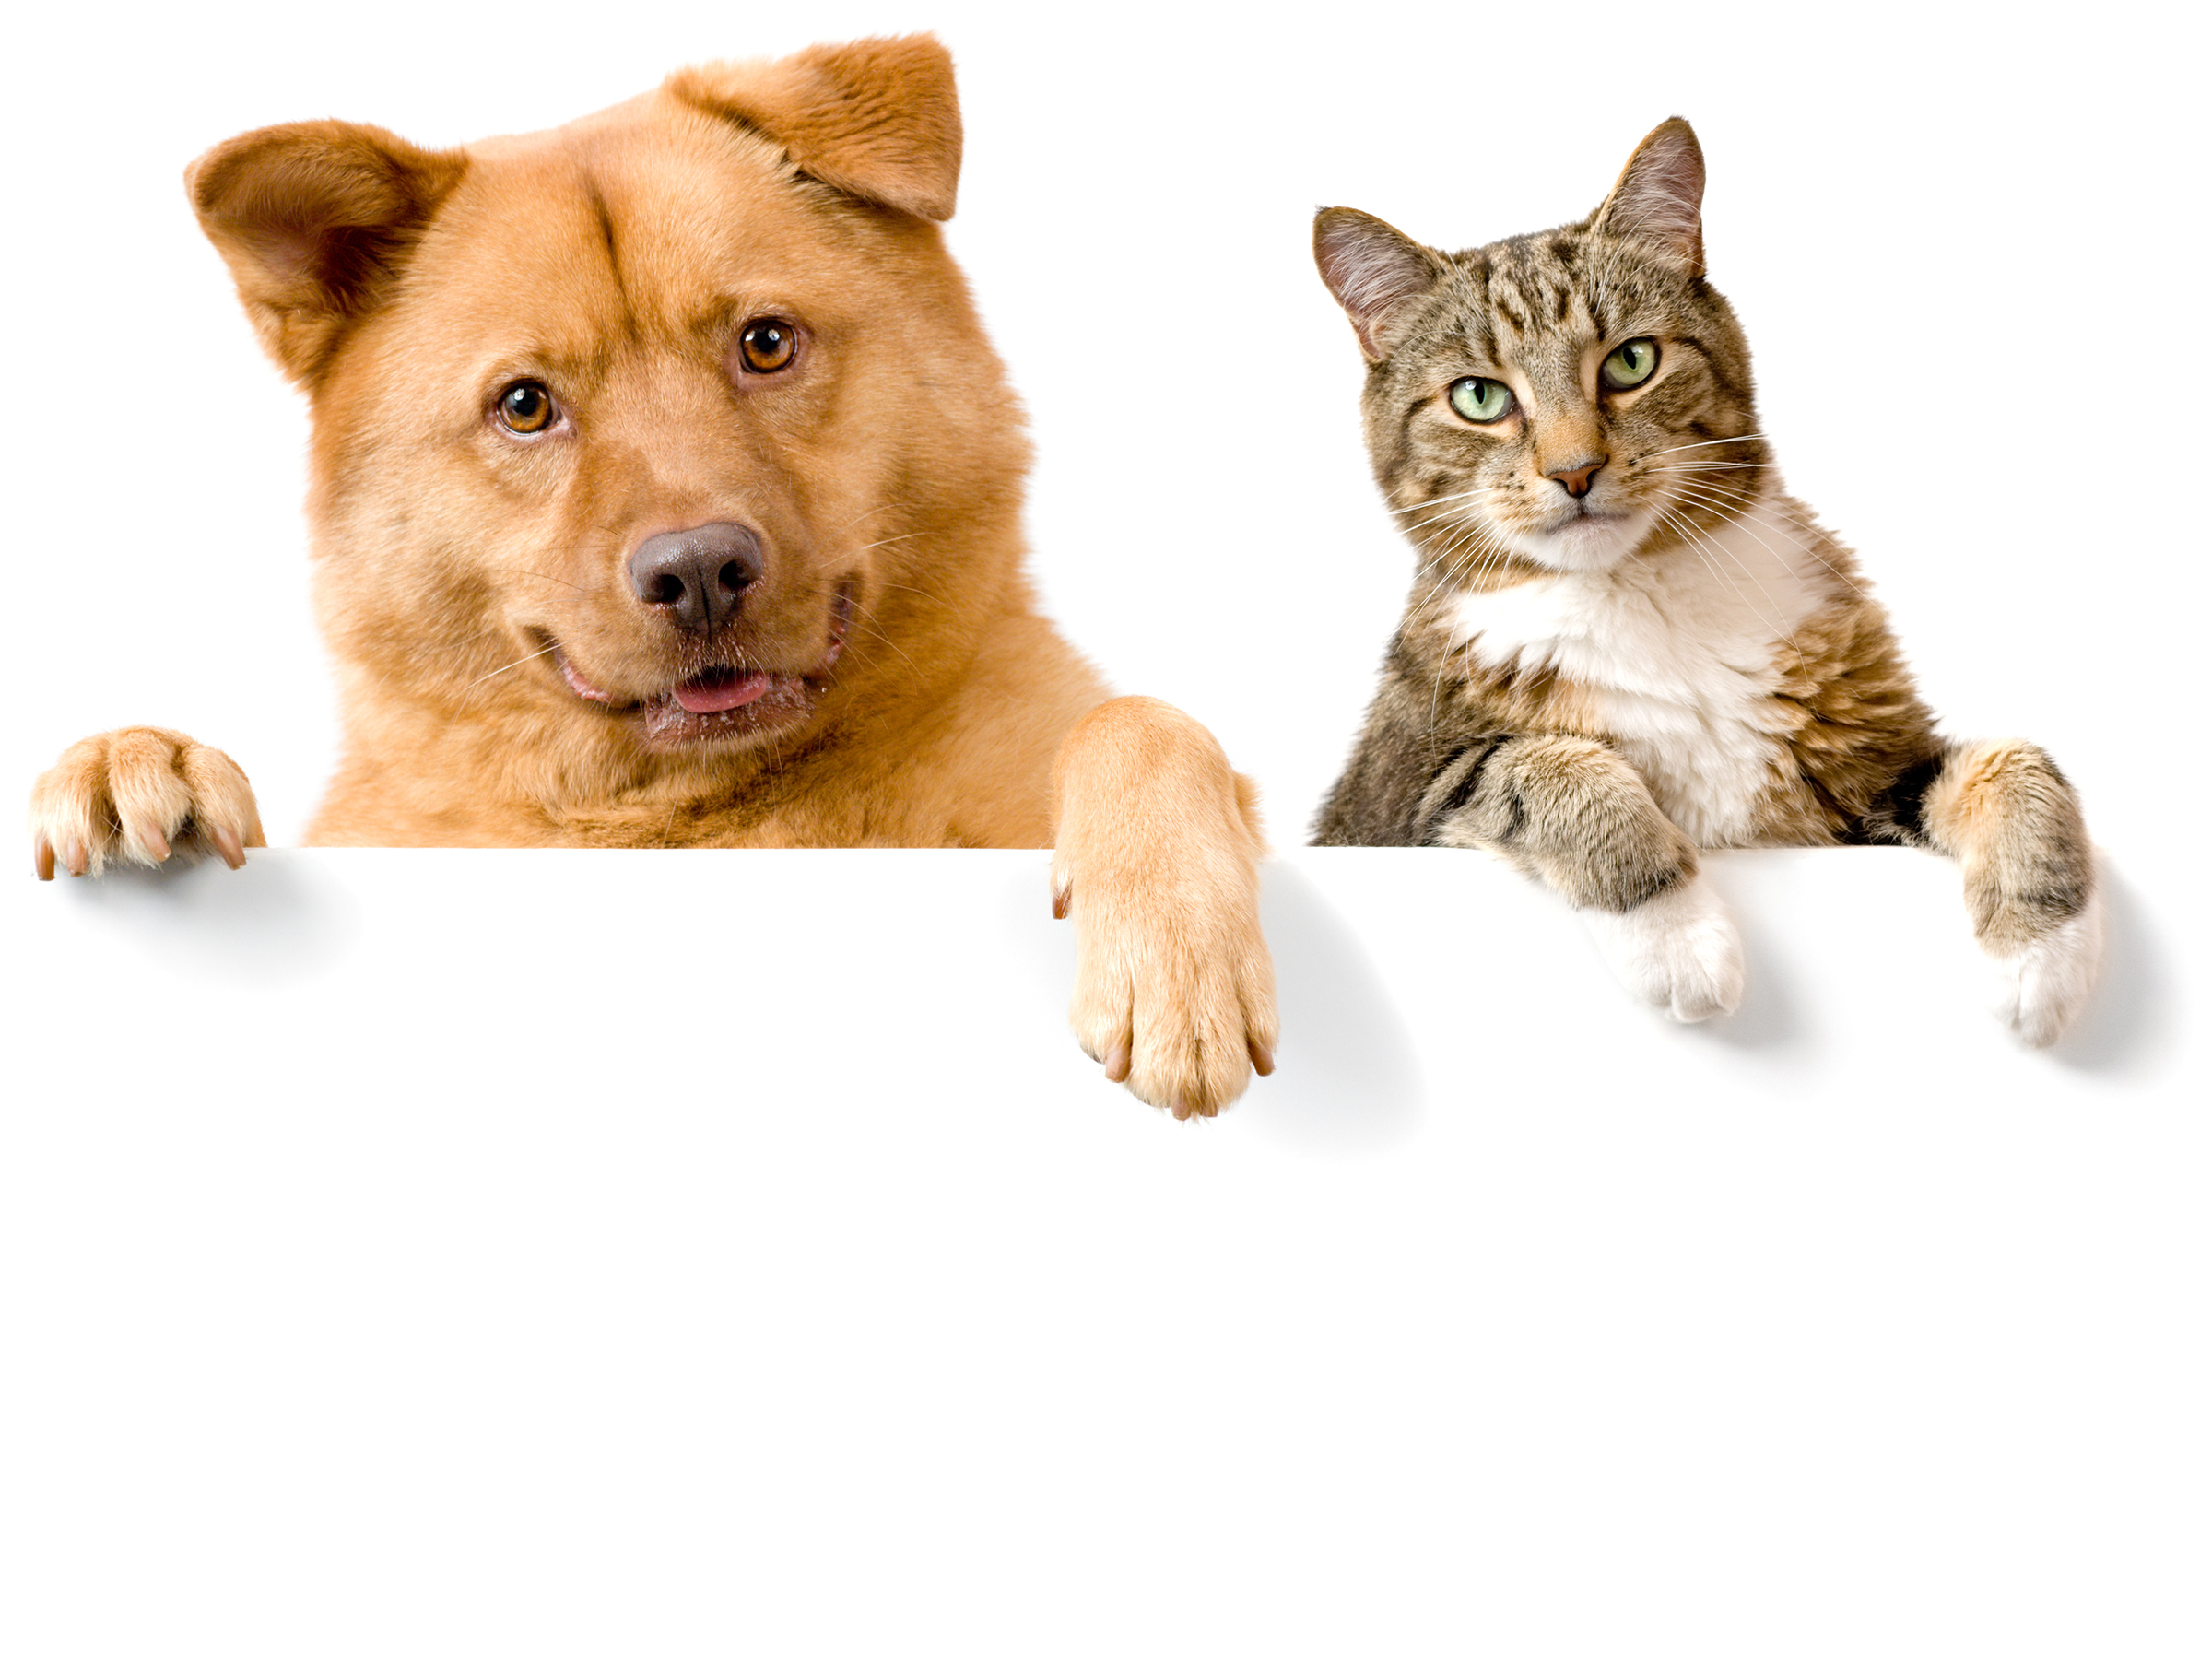 Dog And Cat Wallpaper Background Long